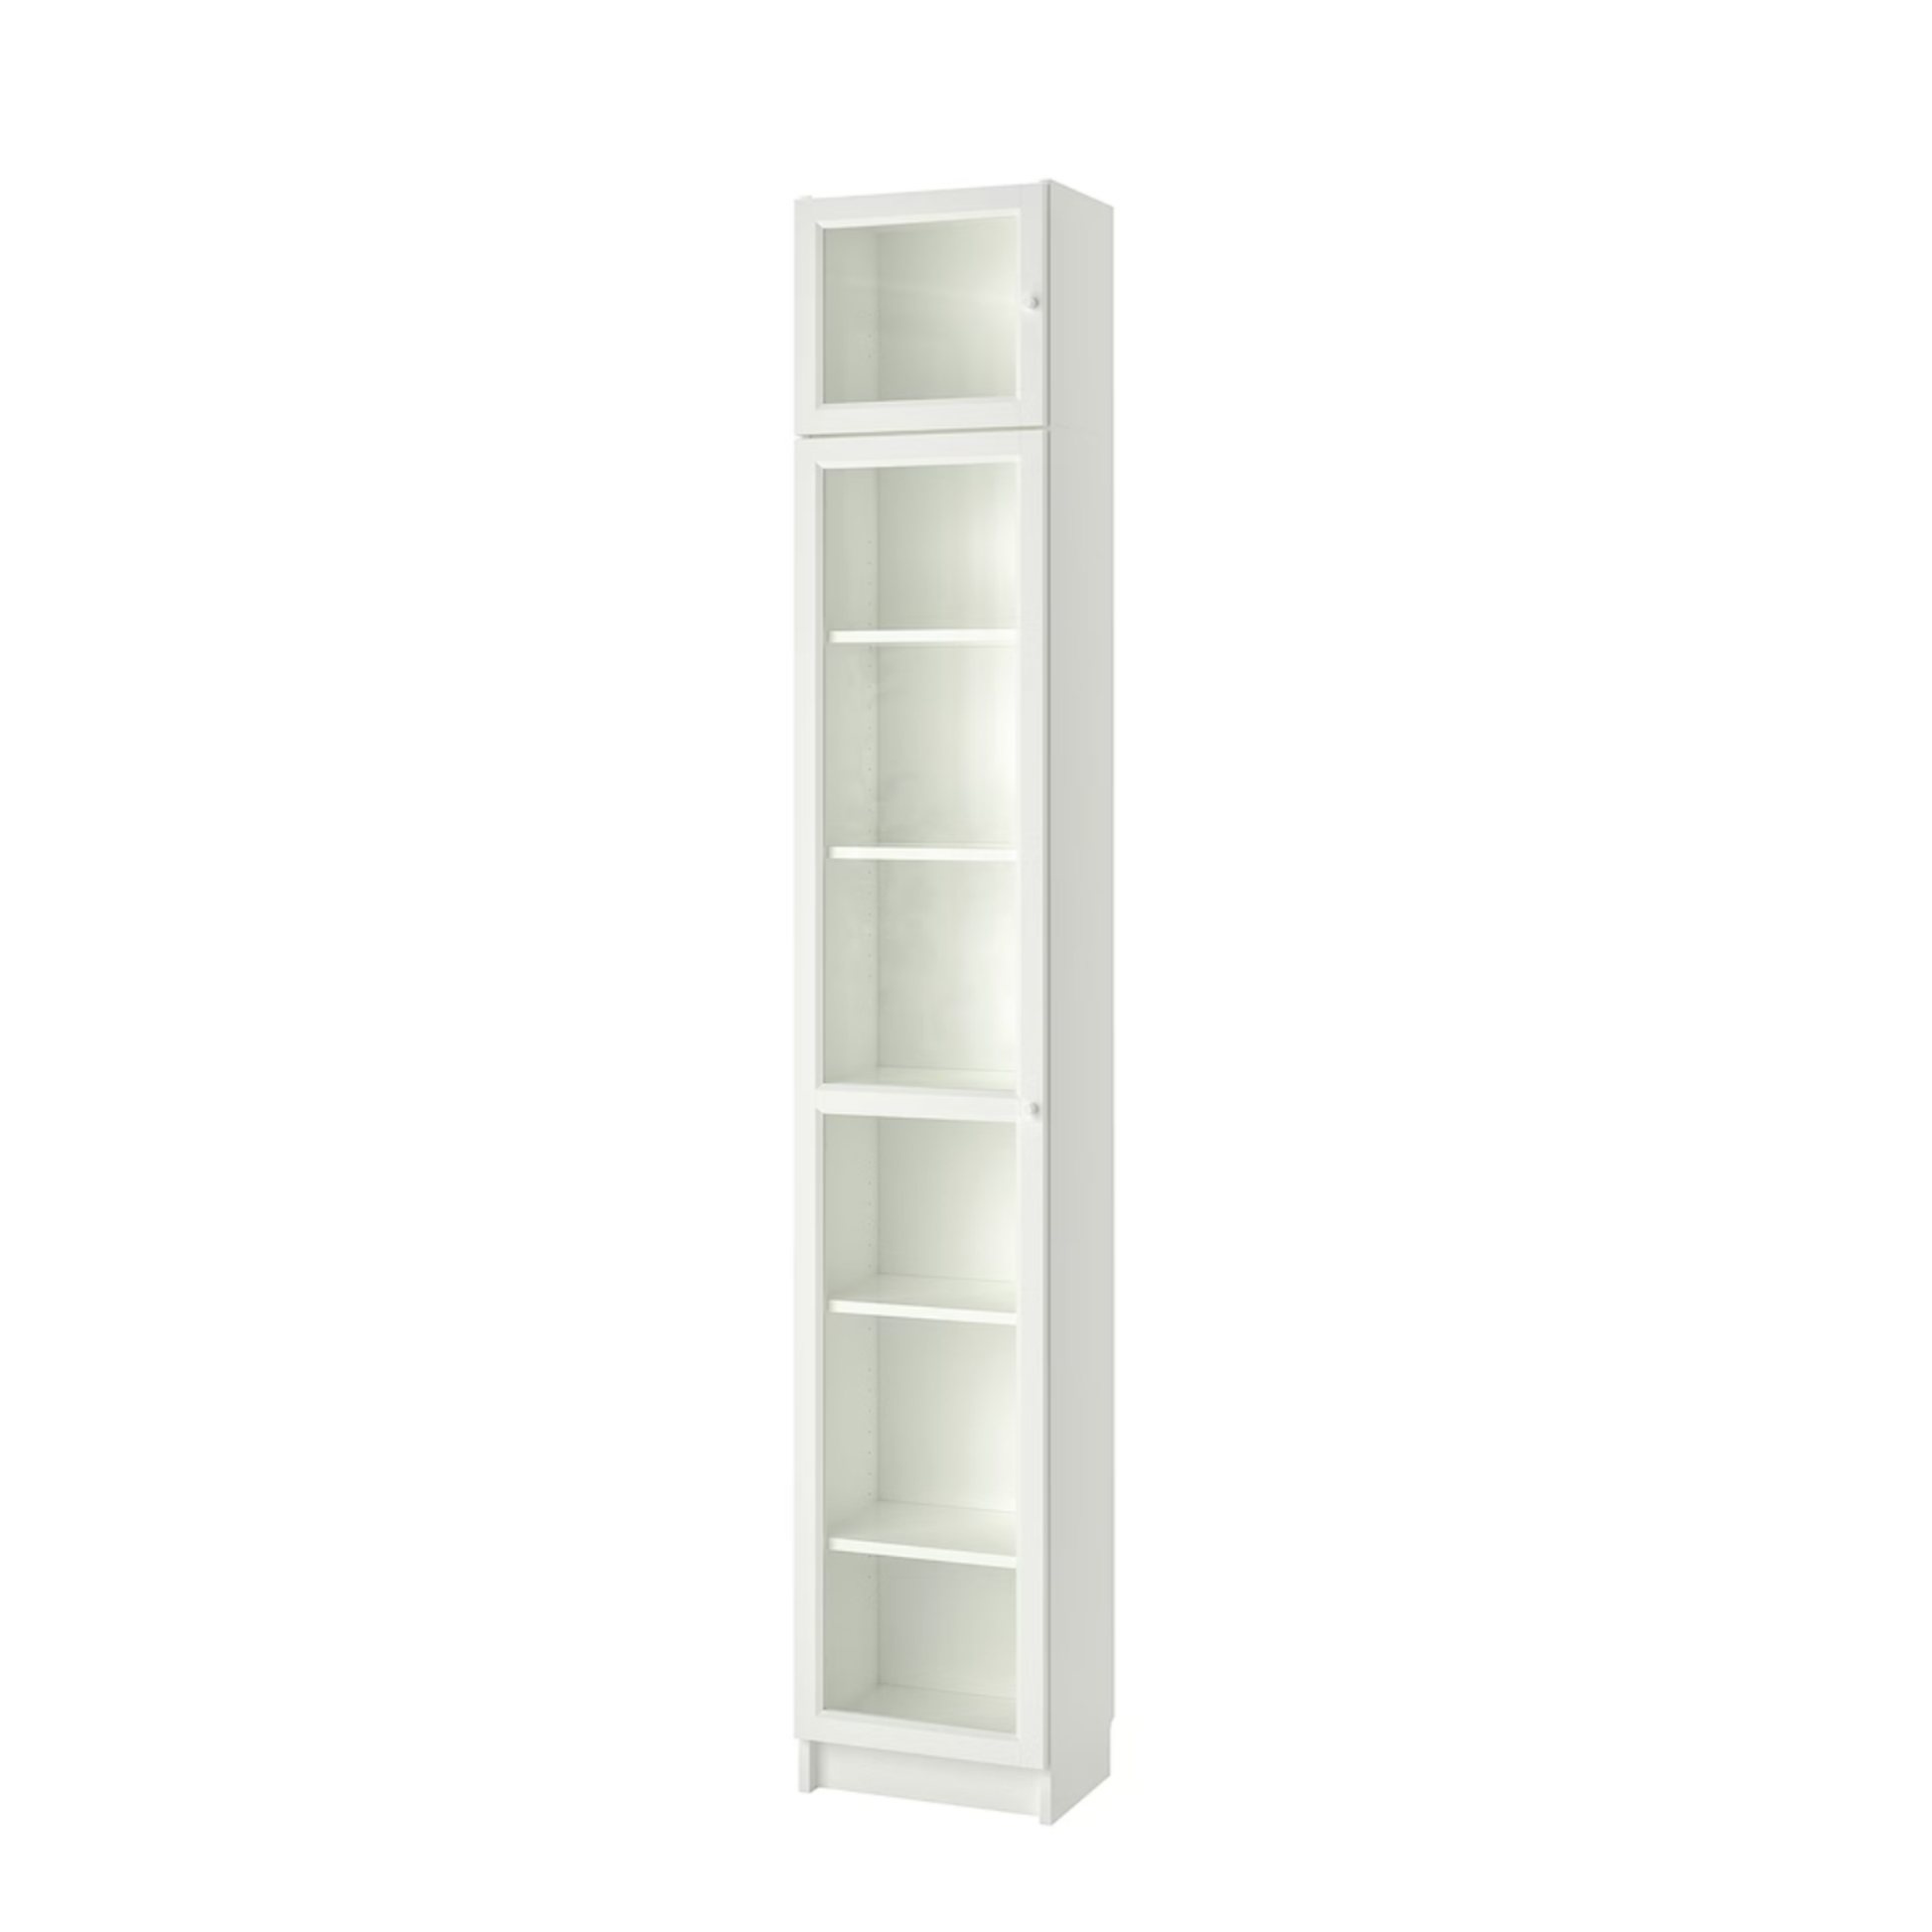 Ikea Billy Bookcase Extension Combo with Oxberg Glass Door, 40x30x237cm, White (8129664254239)